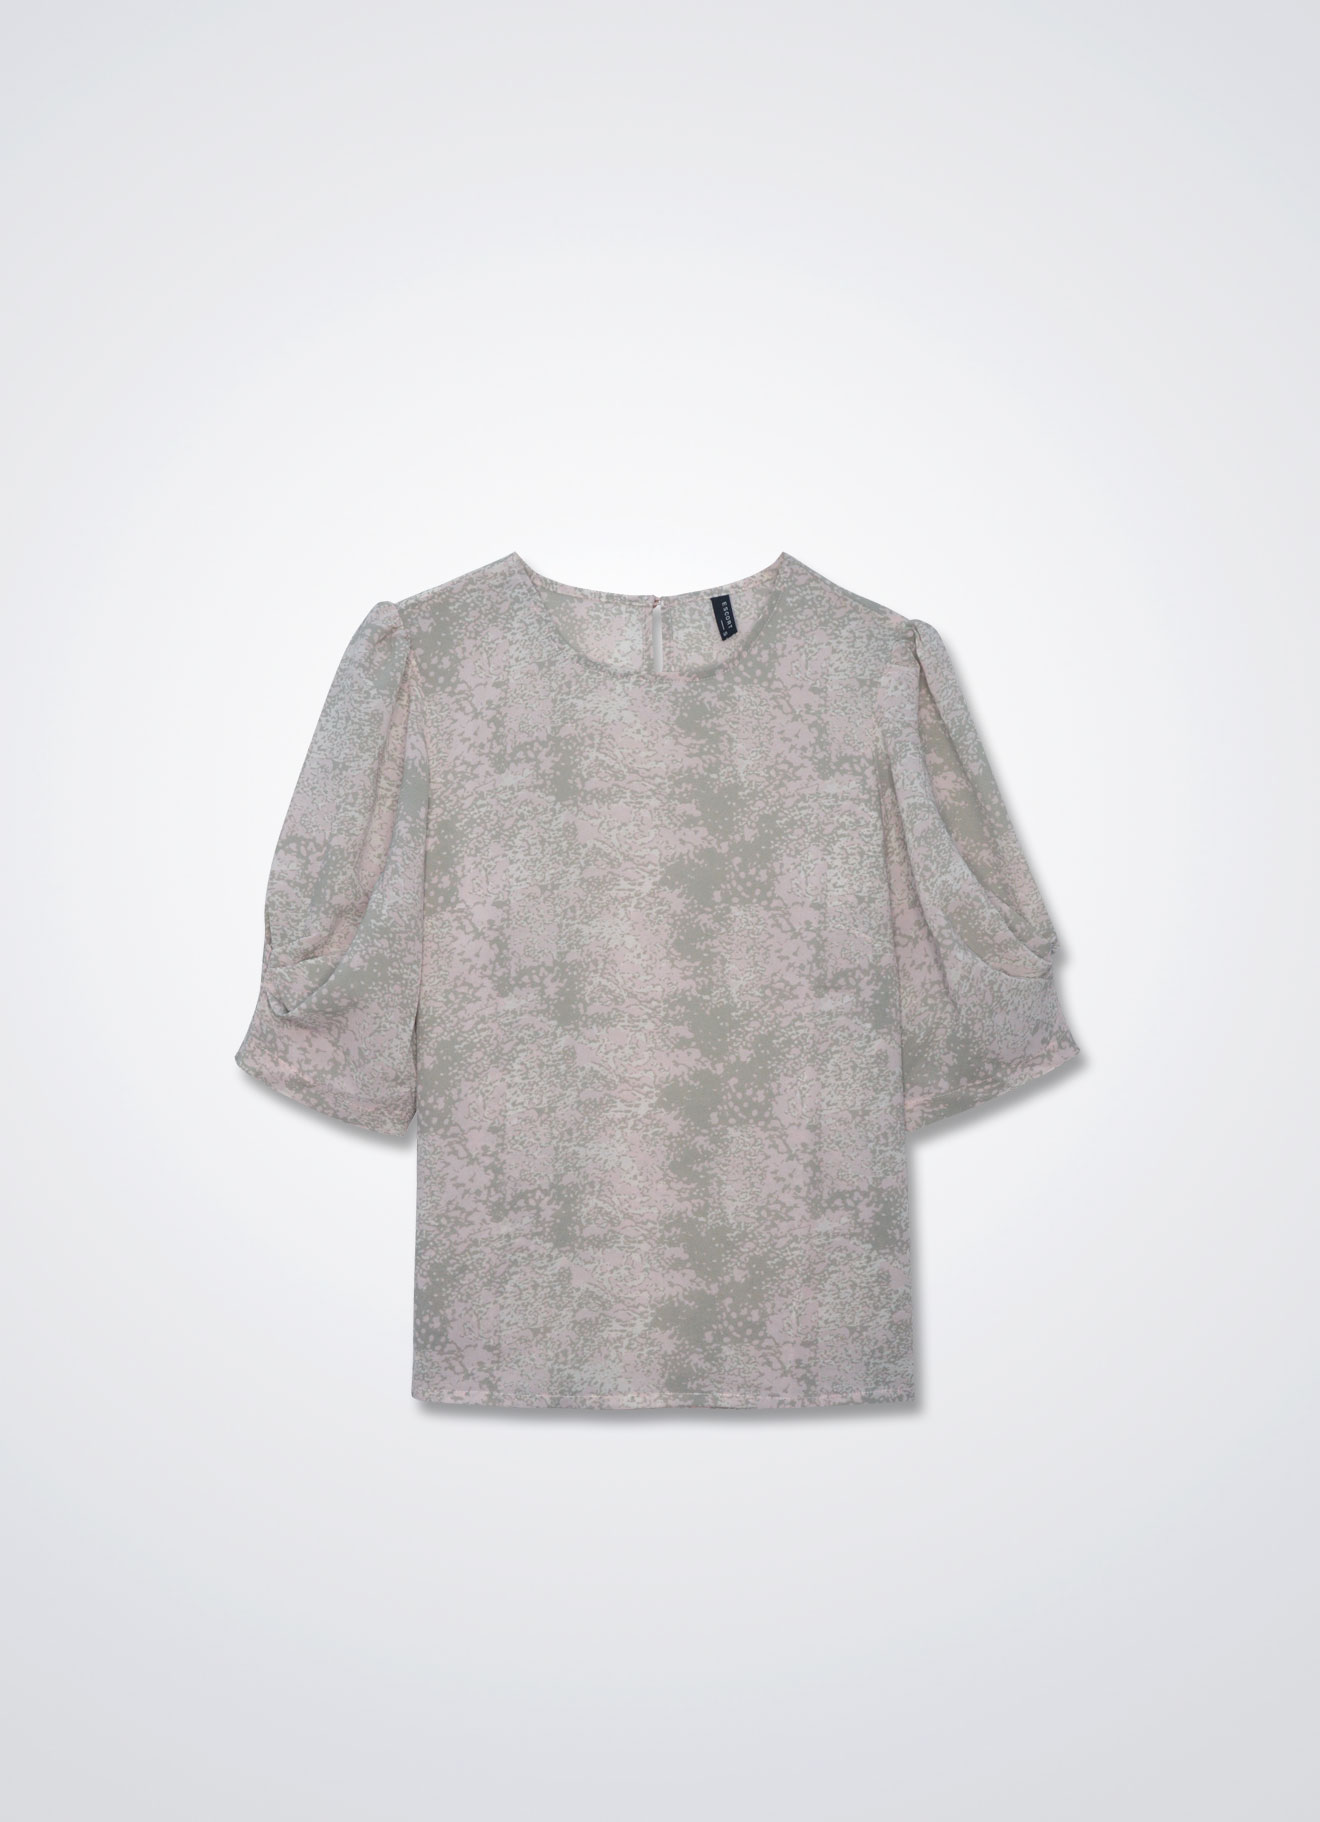 Heavenly-Pink by Floral Printed Blouse